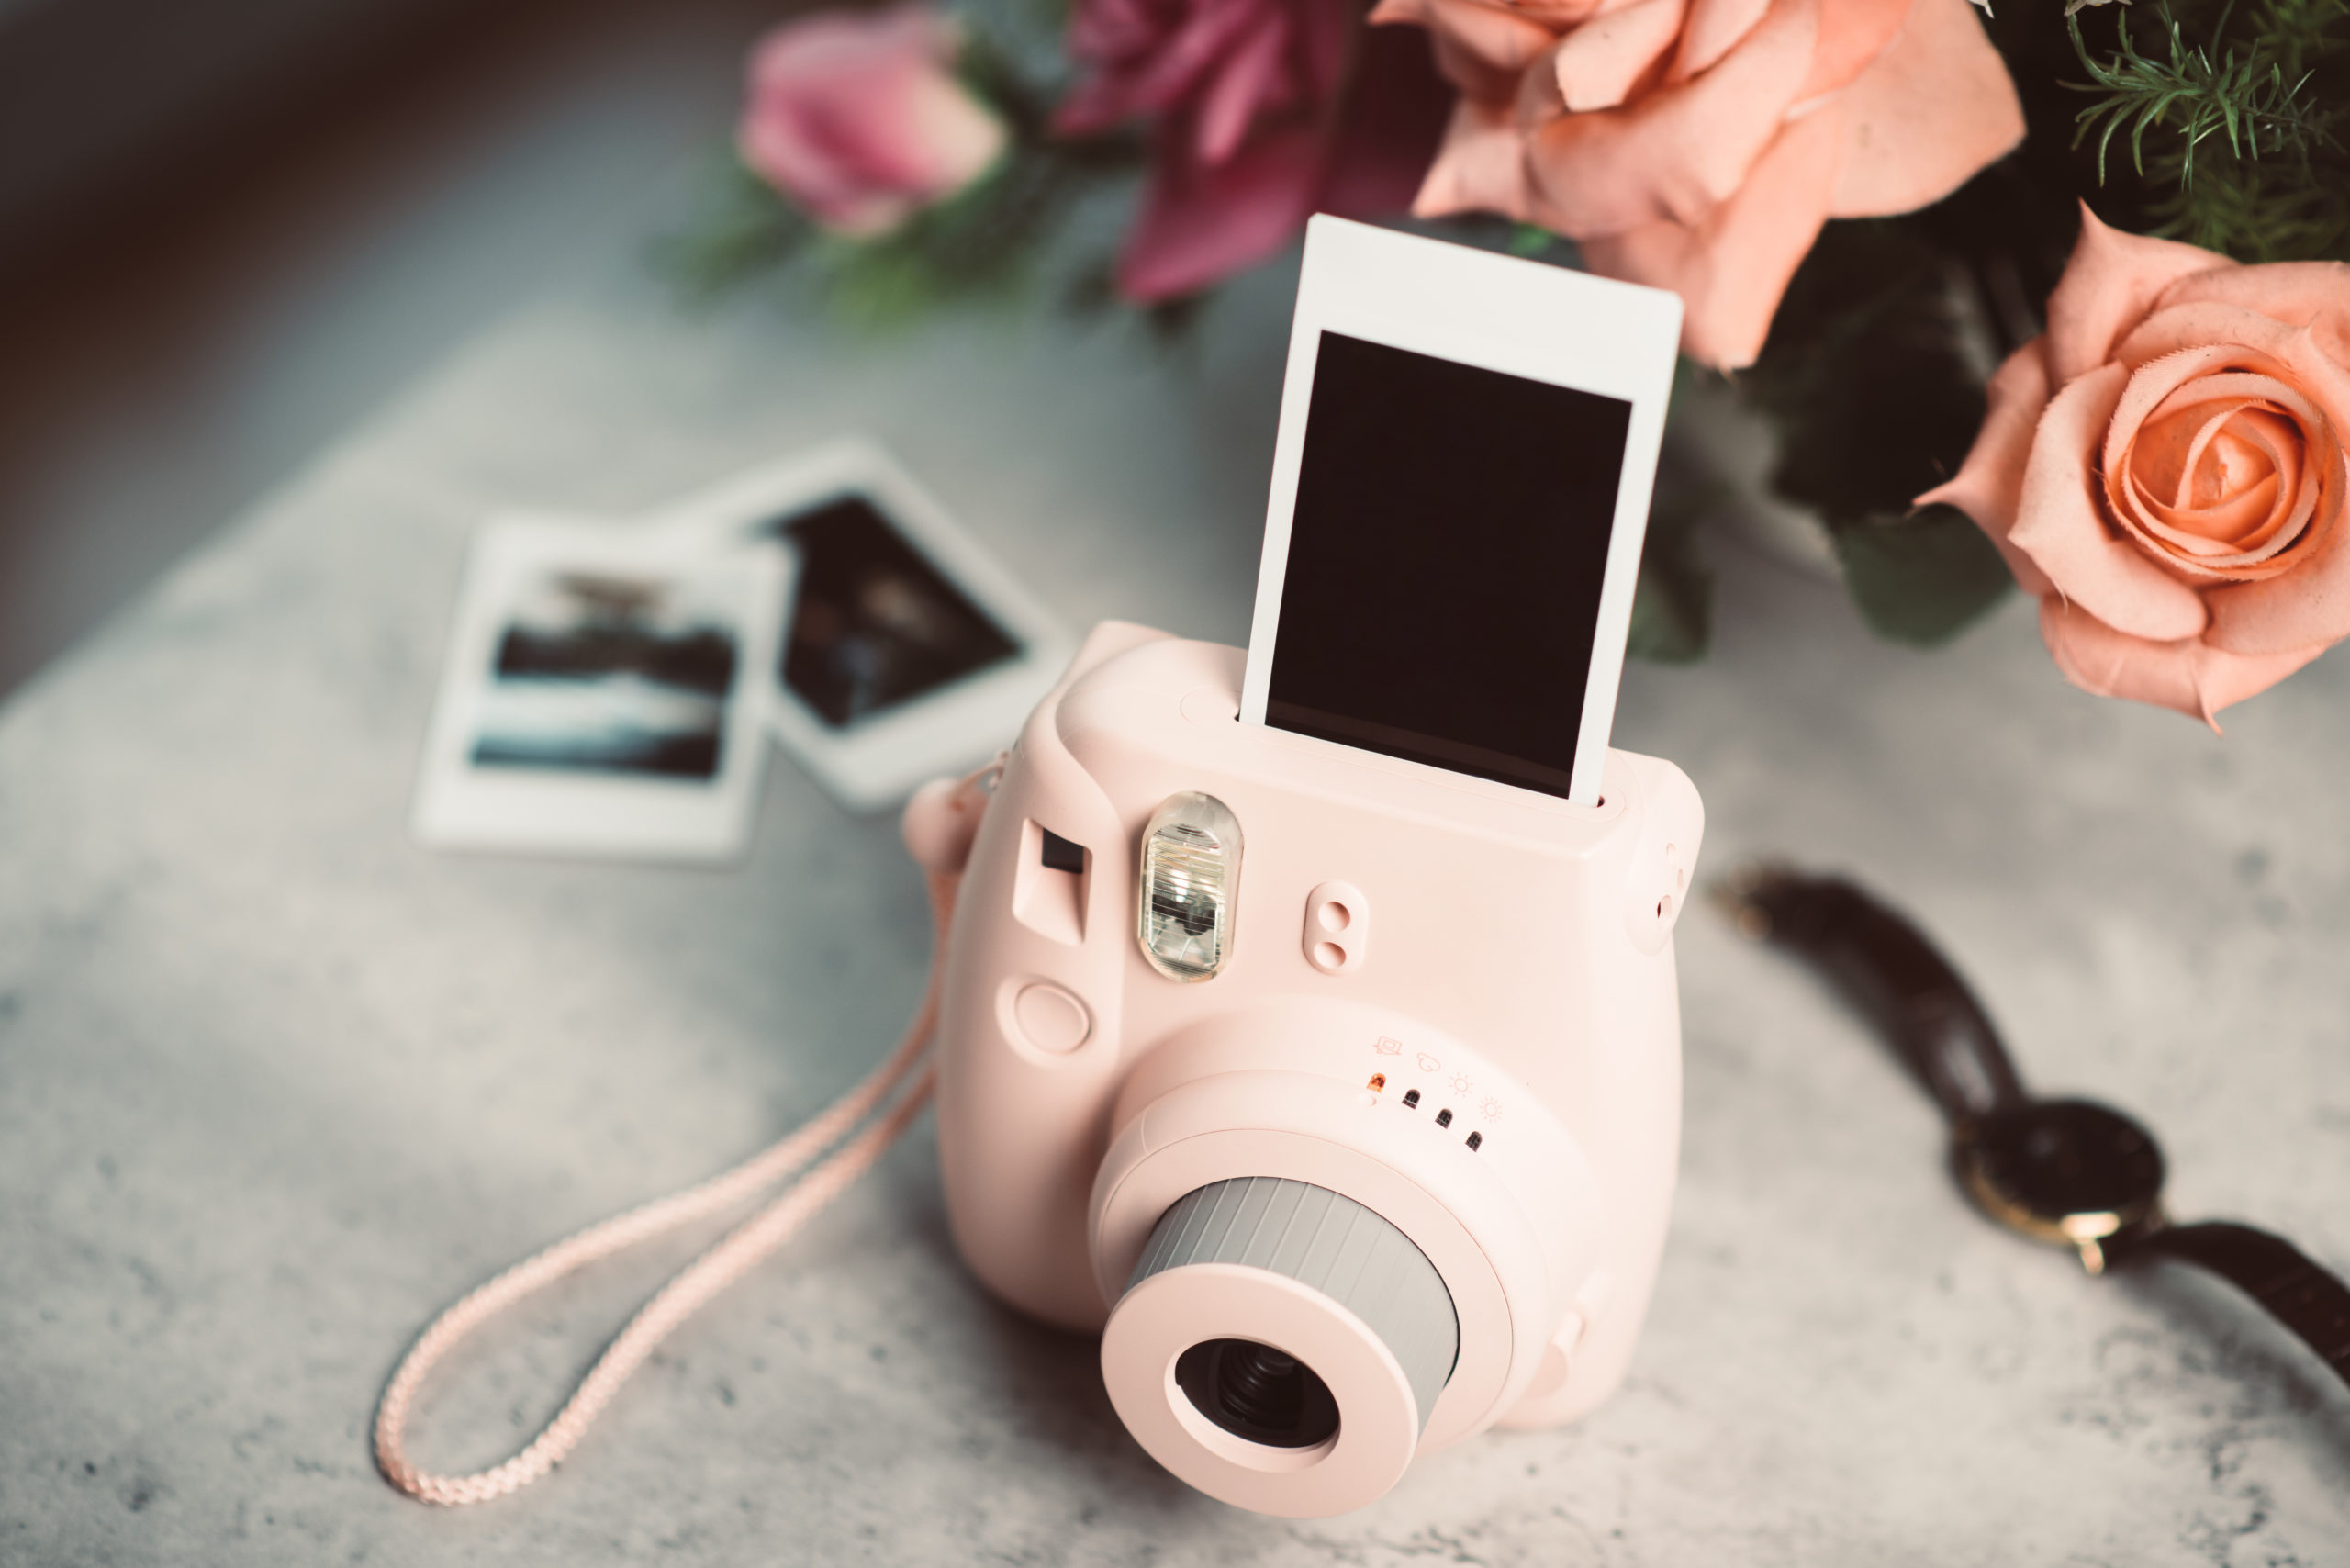 Pink instant camera printing a blank photo on a table with other photos and pink roses